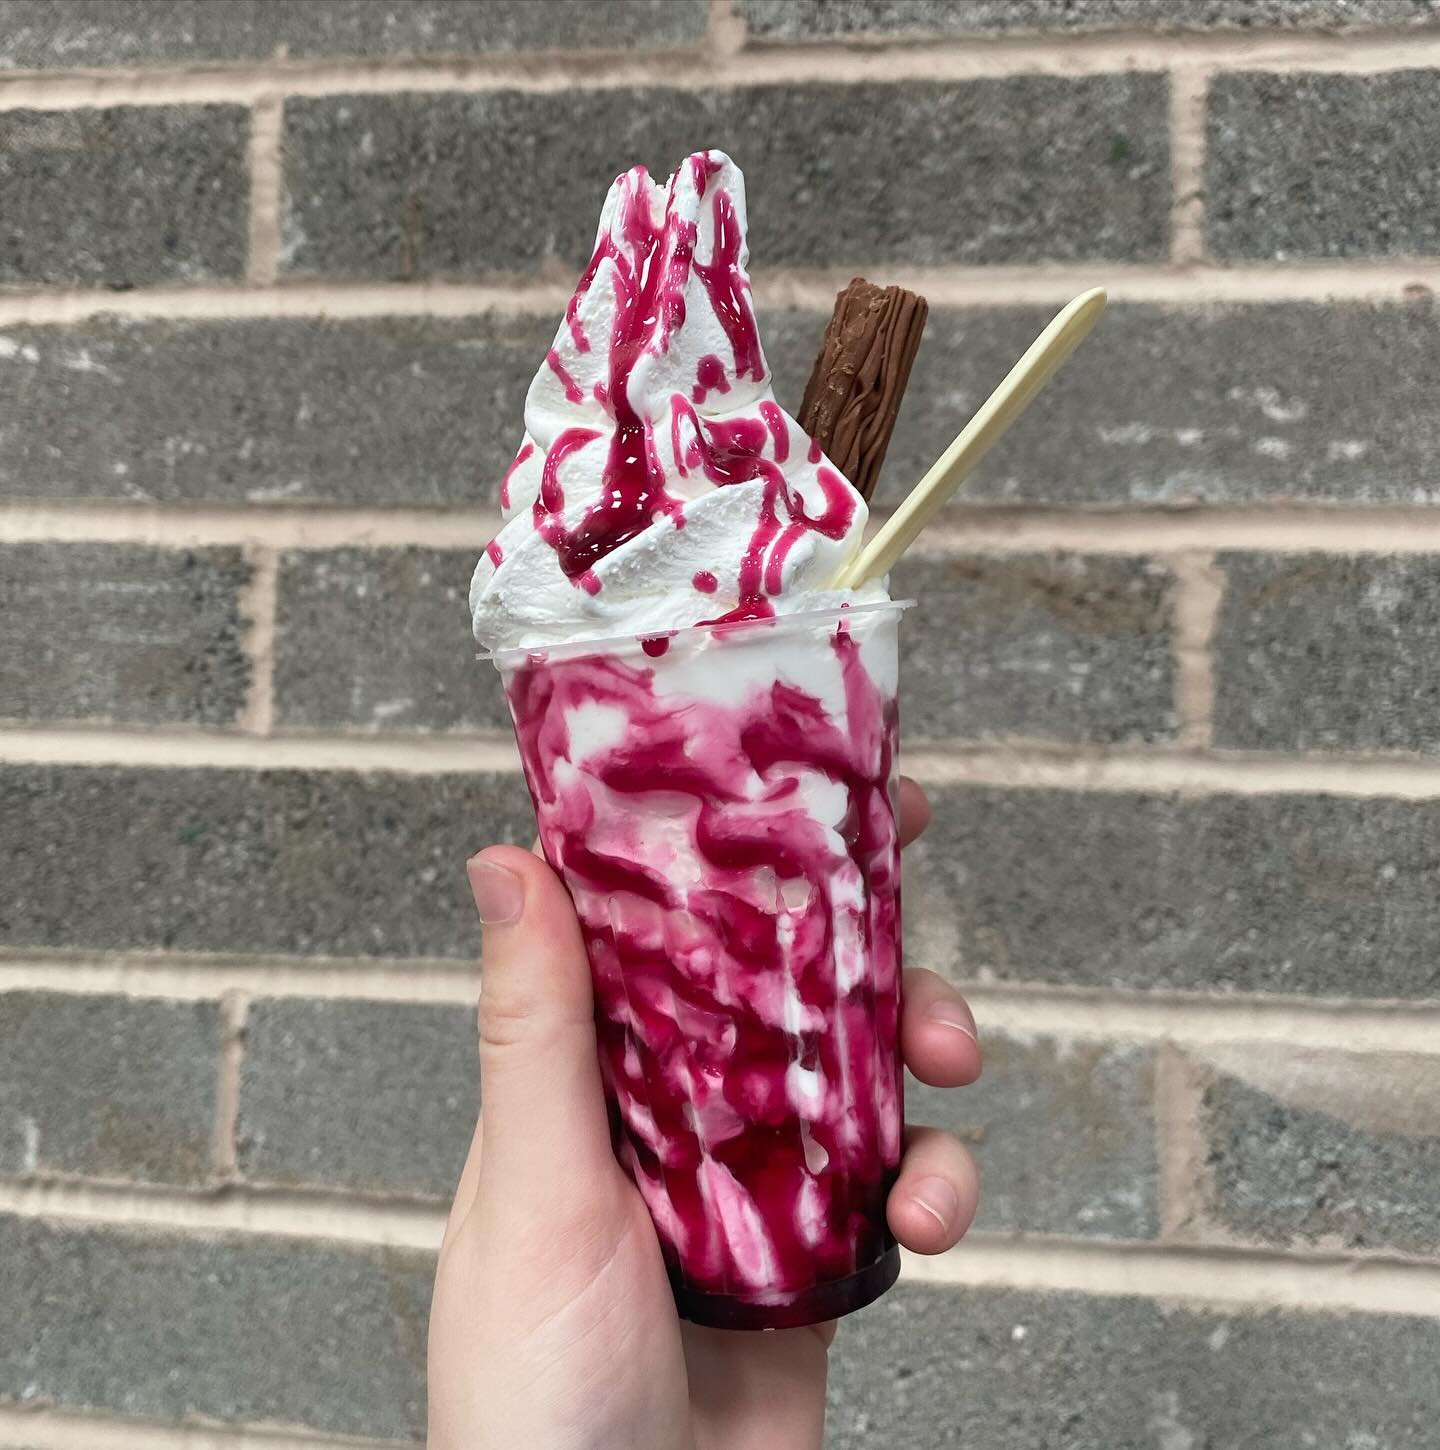 Is there such thing as too much raspberry sauce??? 
(The answer is no)

#lewisbrosicecream #icecream #icecreamlover #flake #icecreamvan #sweet #sweettreats #vanlife #dessert #local #warrington #manchester #manchesterfood #cheshire #warringtonbusiness